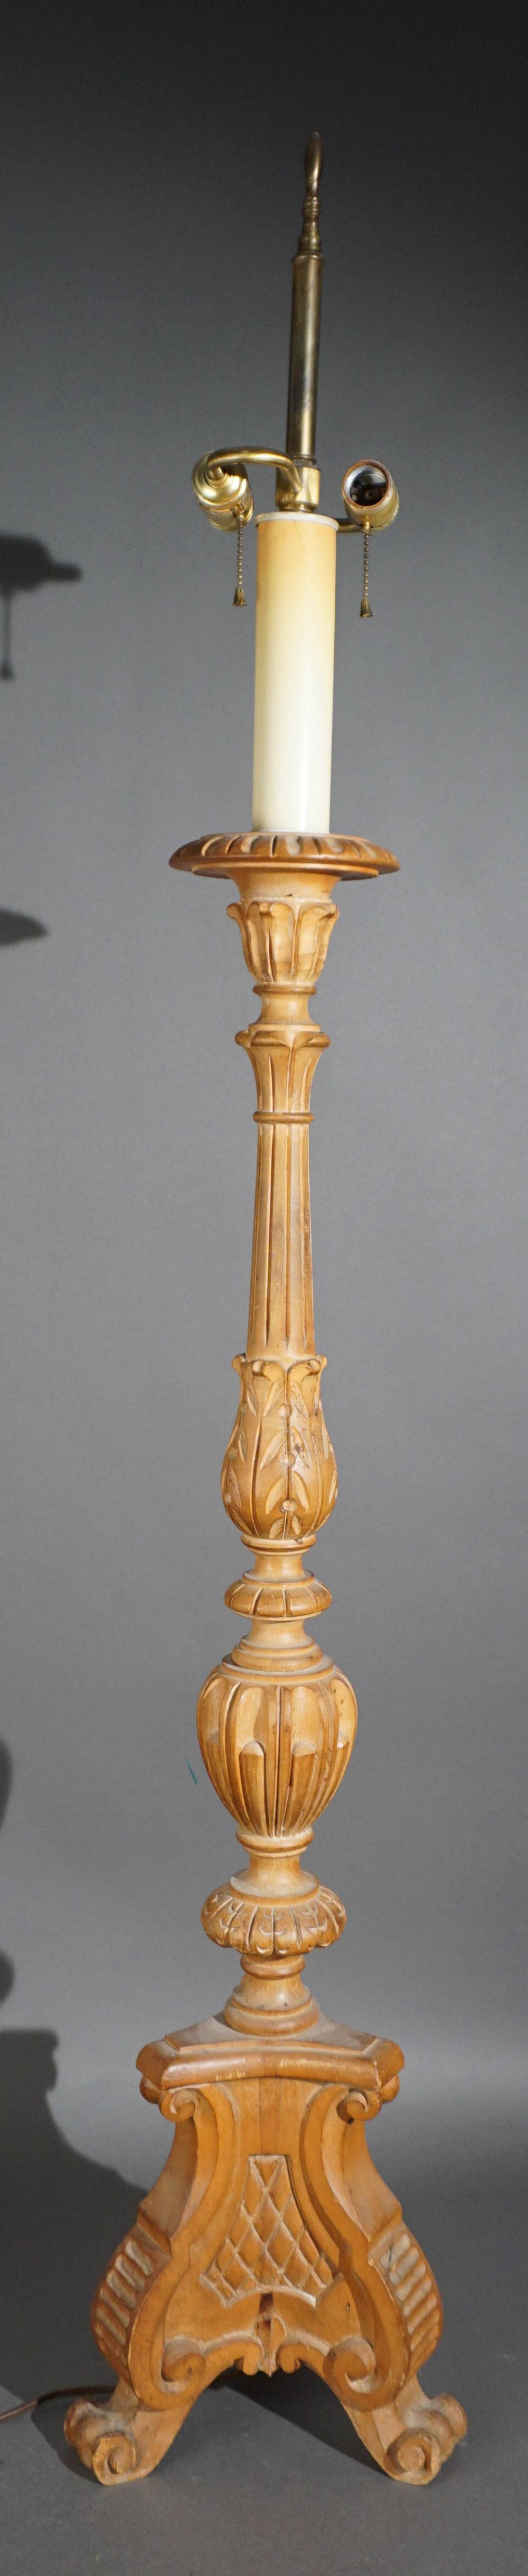 CONTINENTAL CARVED TALL WOOD PRICKET 2e7f77